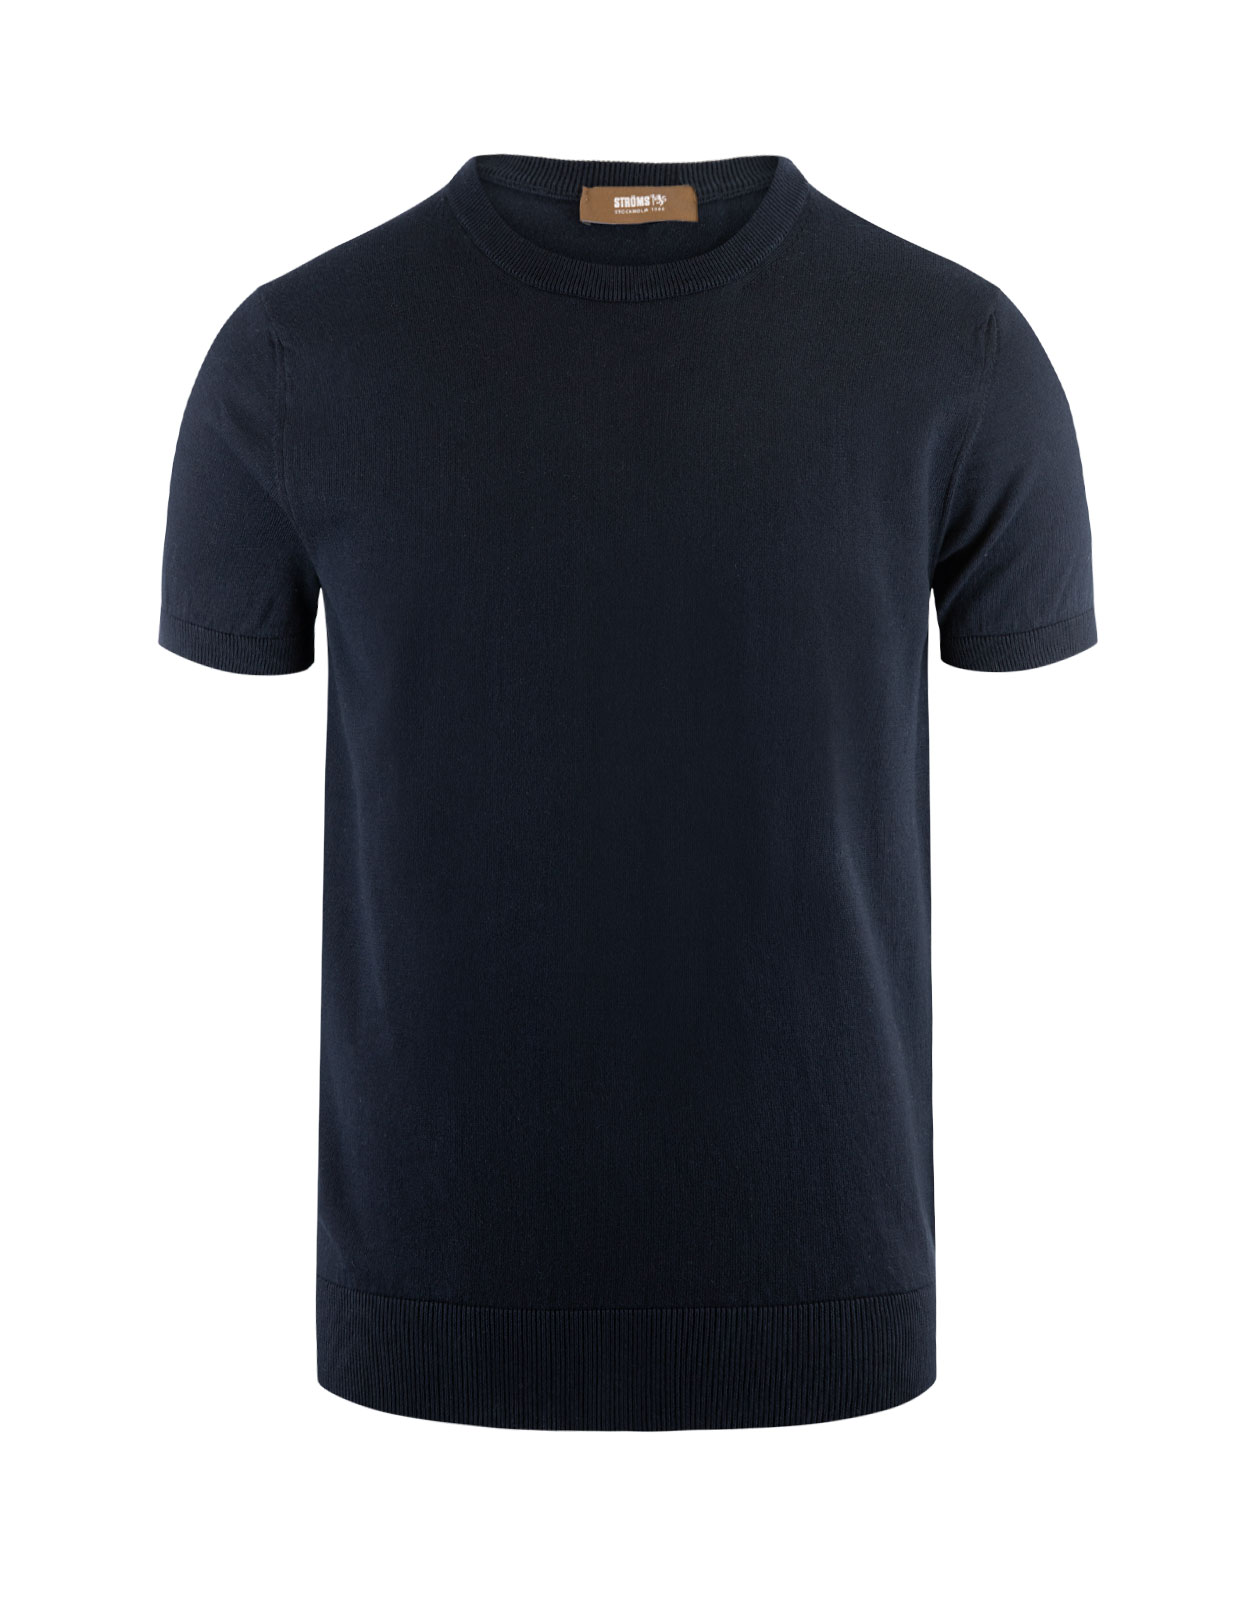 T-Shirt Knitted Cotton Blue Navy